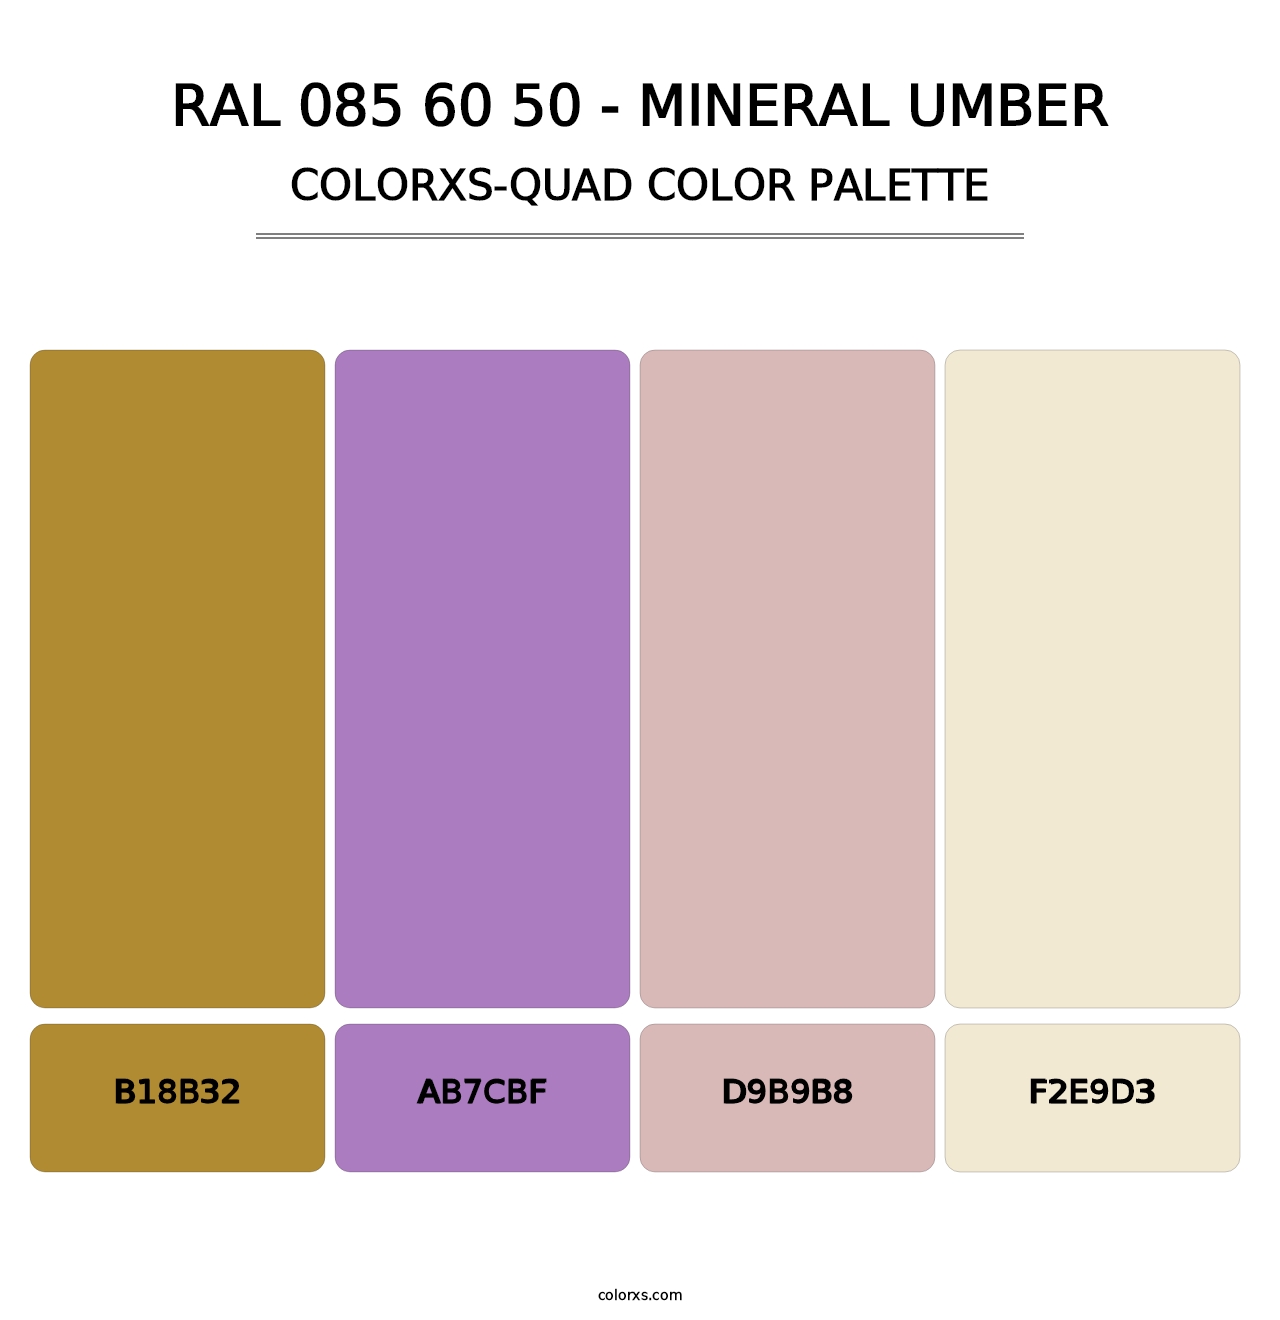 RAL 085 60 50 - Mineral Umber - Colorxs Quad Palette